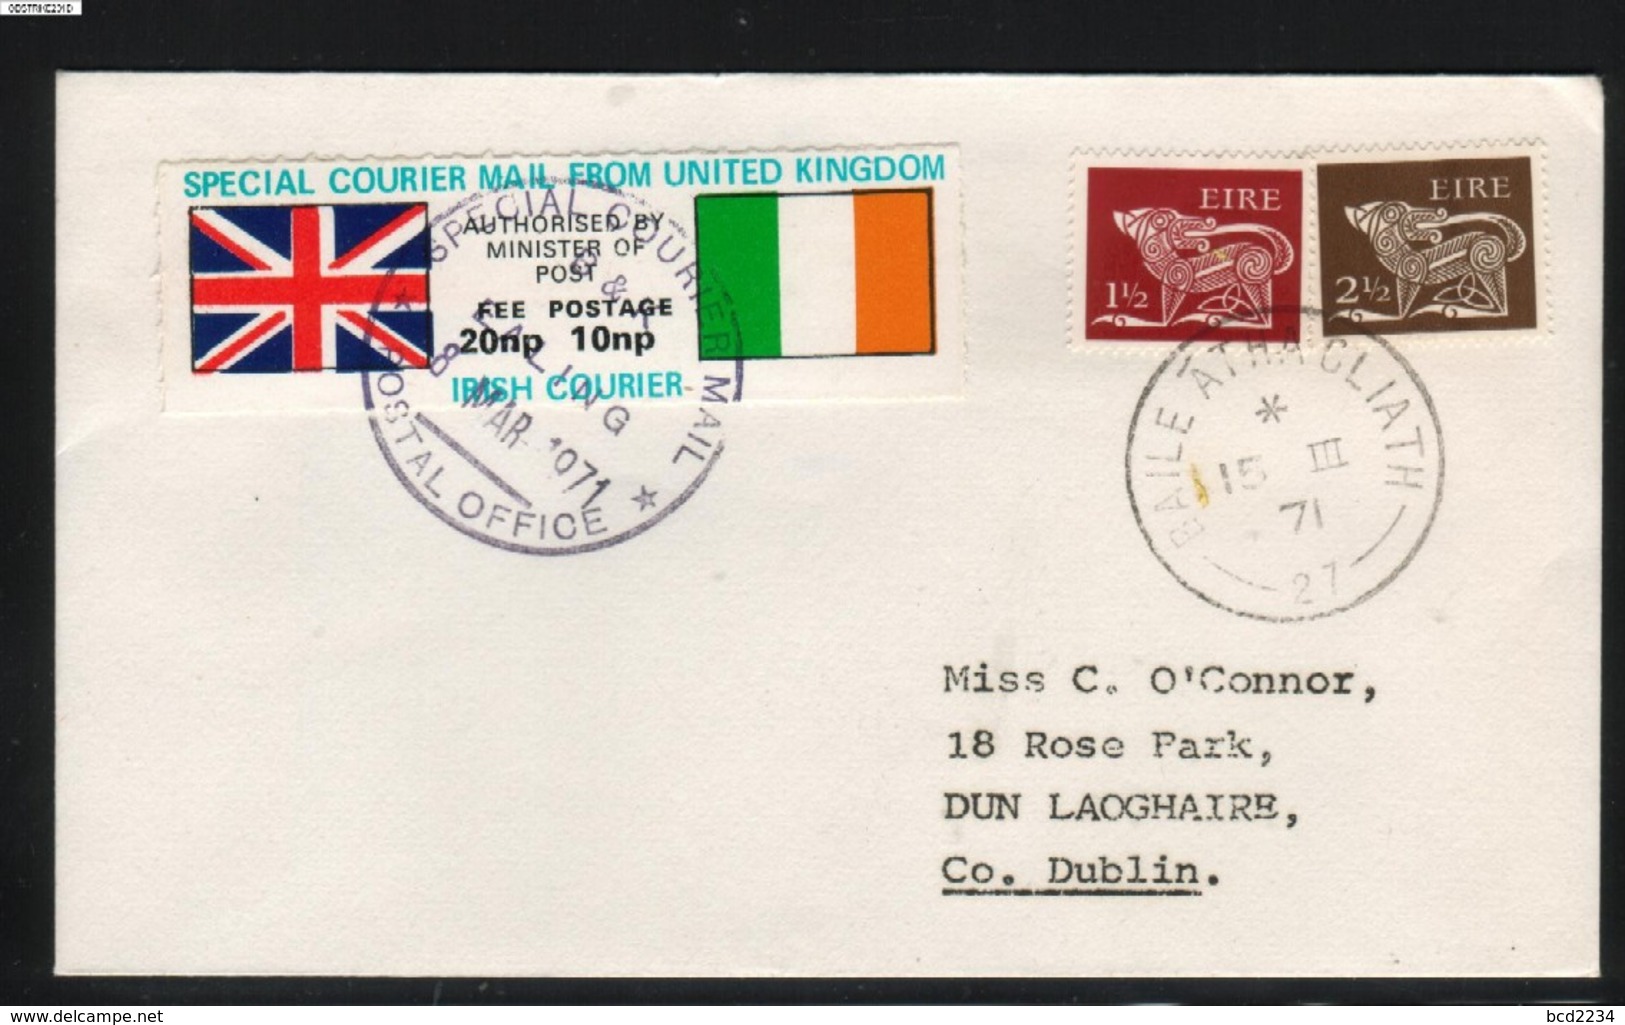 GREAT BRITAIN GB 1971 POSTAL STRIKE MAIL SPECIAL COURIER MAIL 2ND ISSUE DECIMAL COVER LONDON TO IRELAND EIRE 8 MARCH - Cinderellas